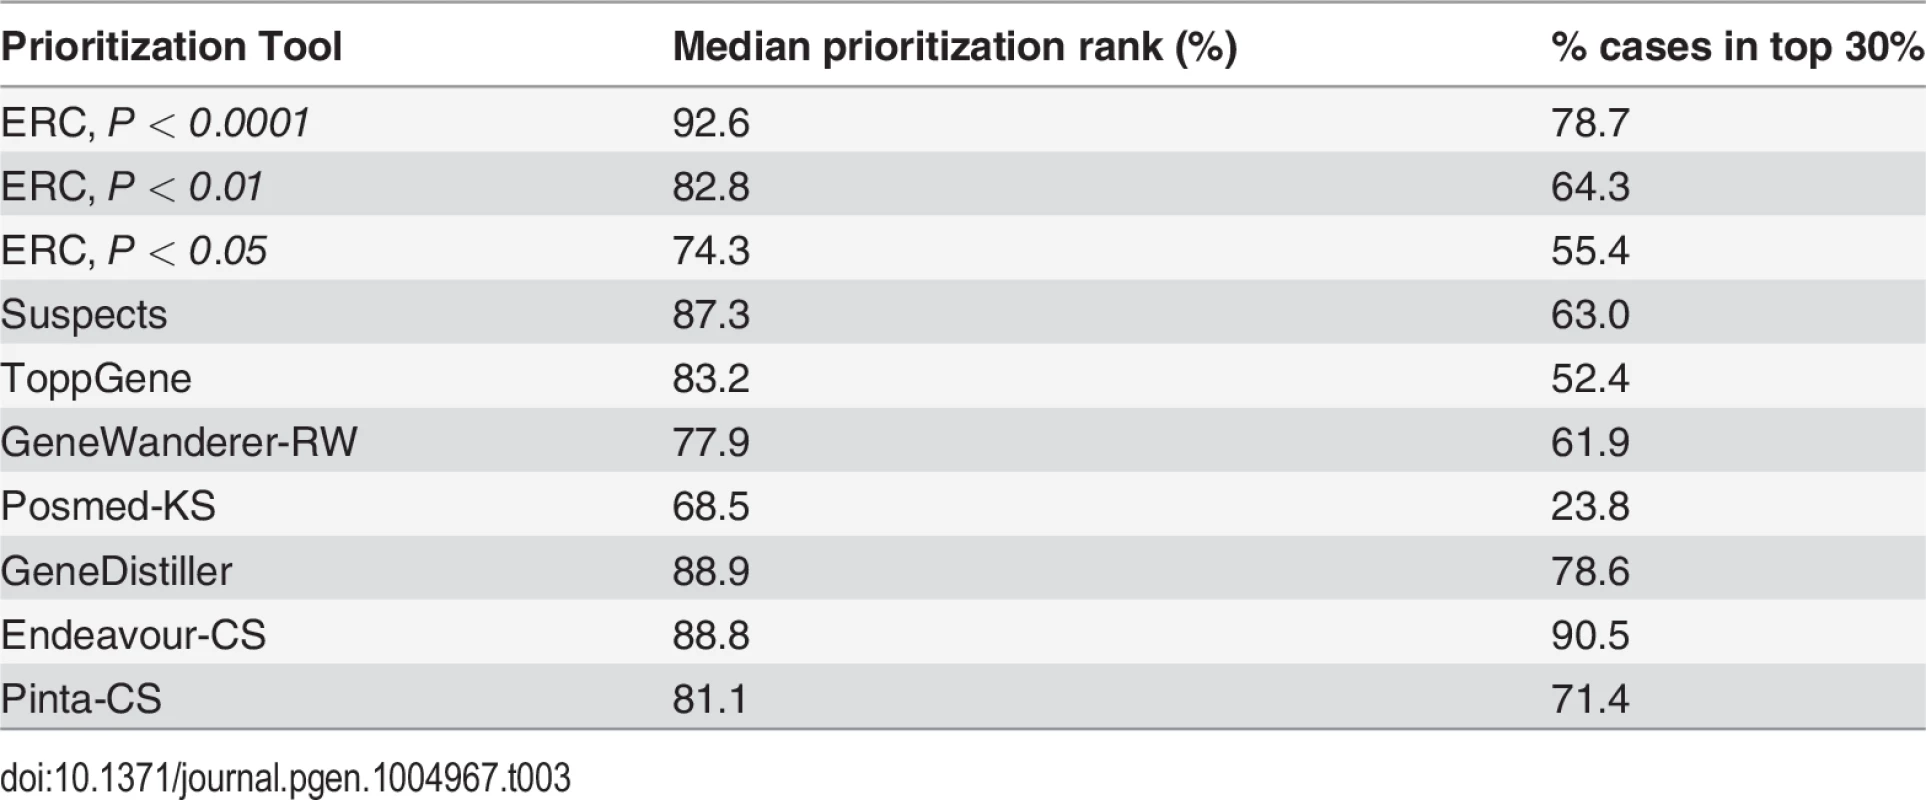 ERC gene prioritization compared to other methods.